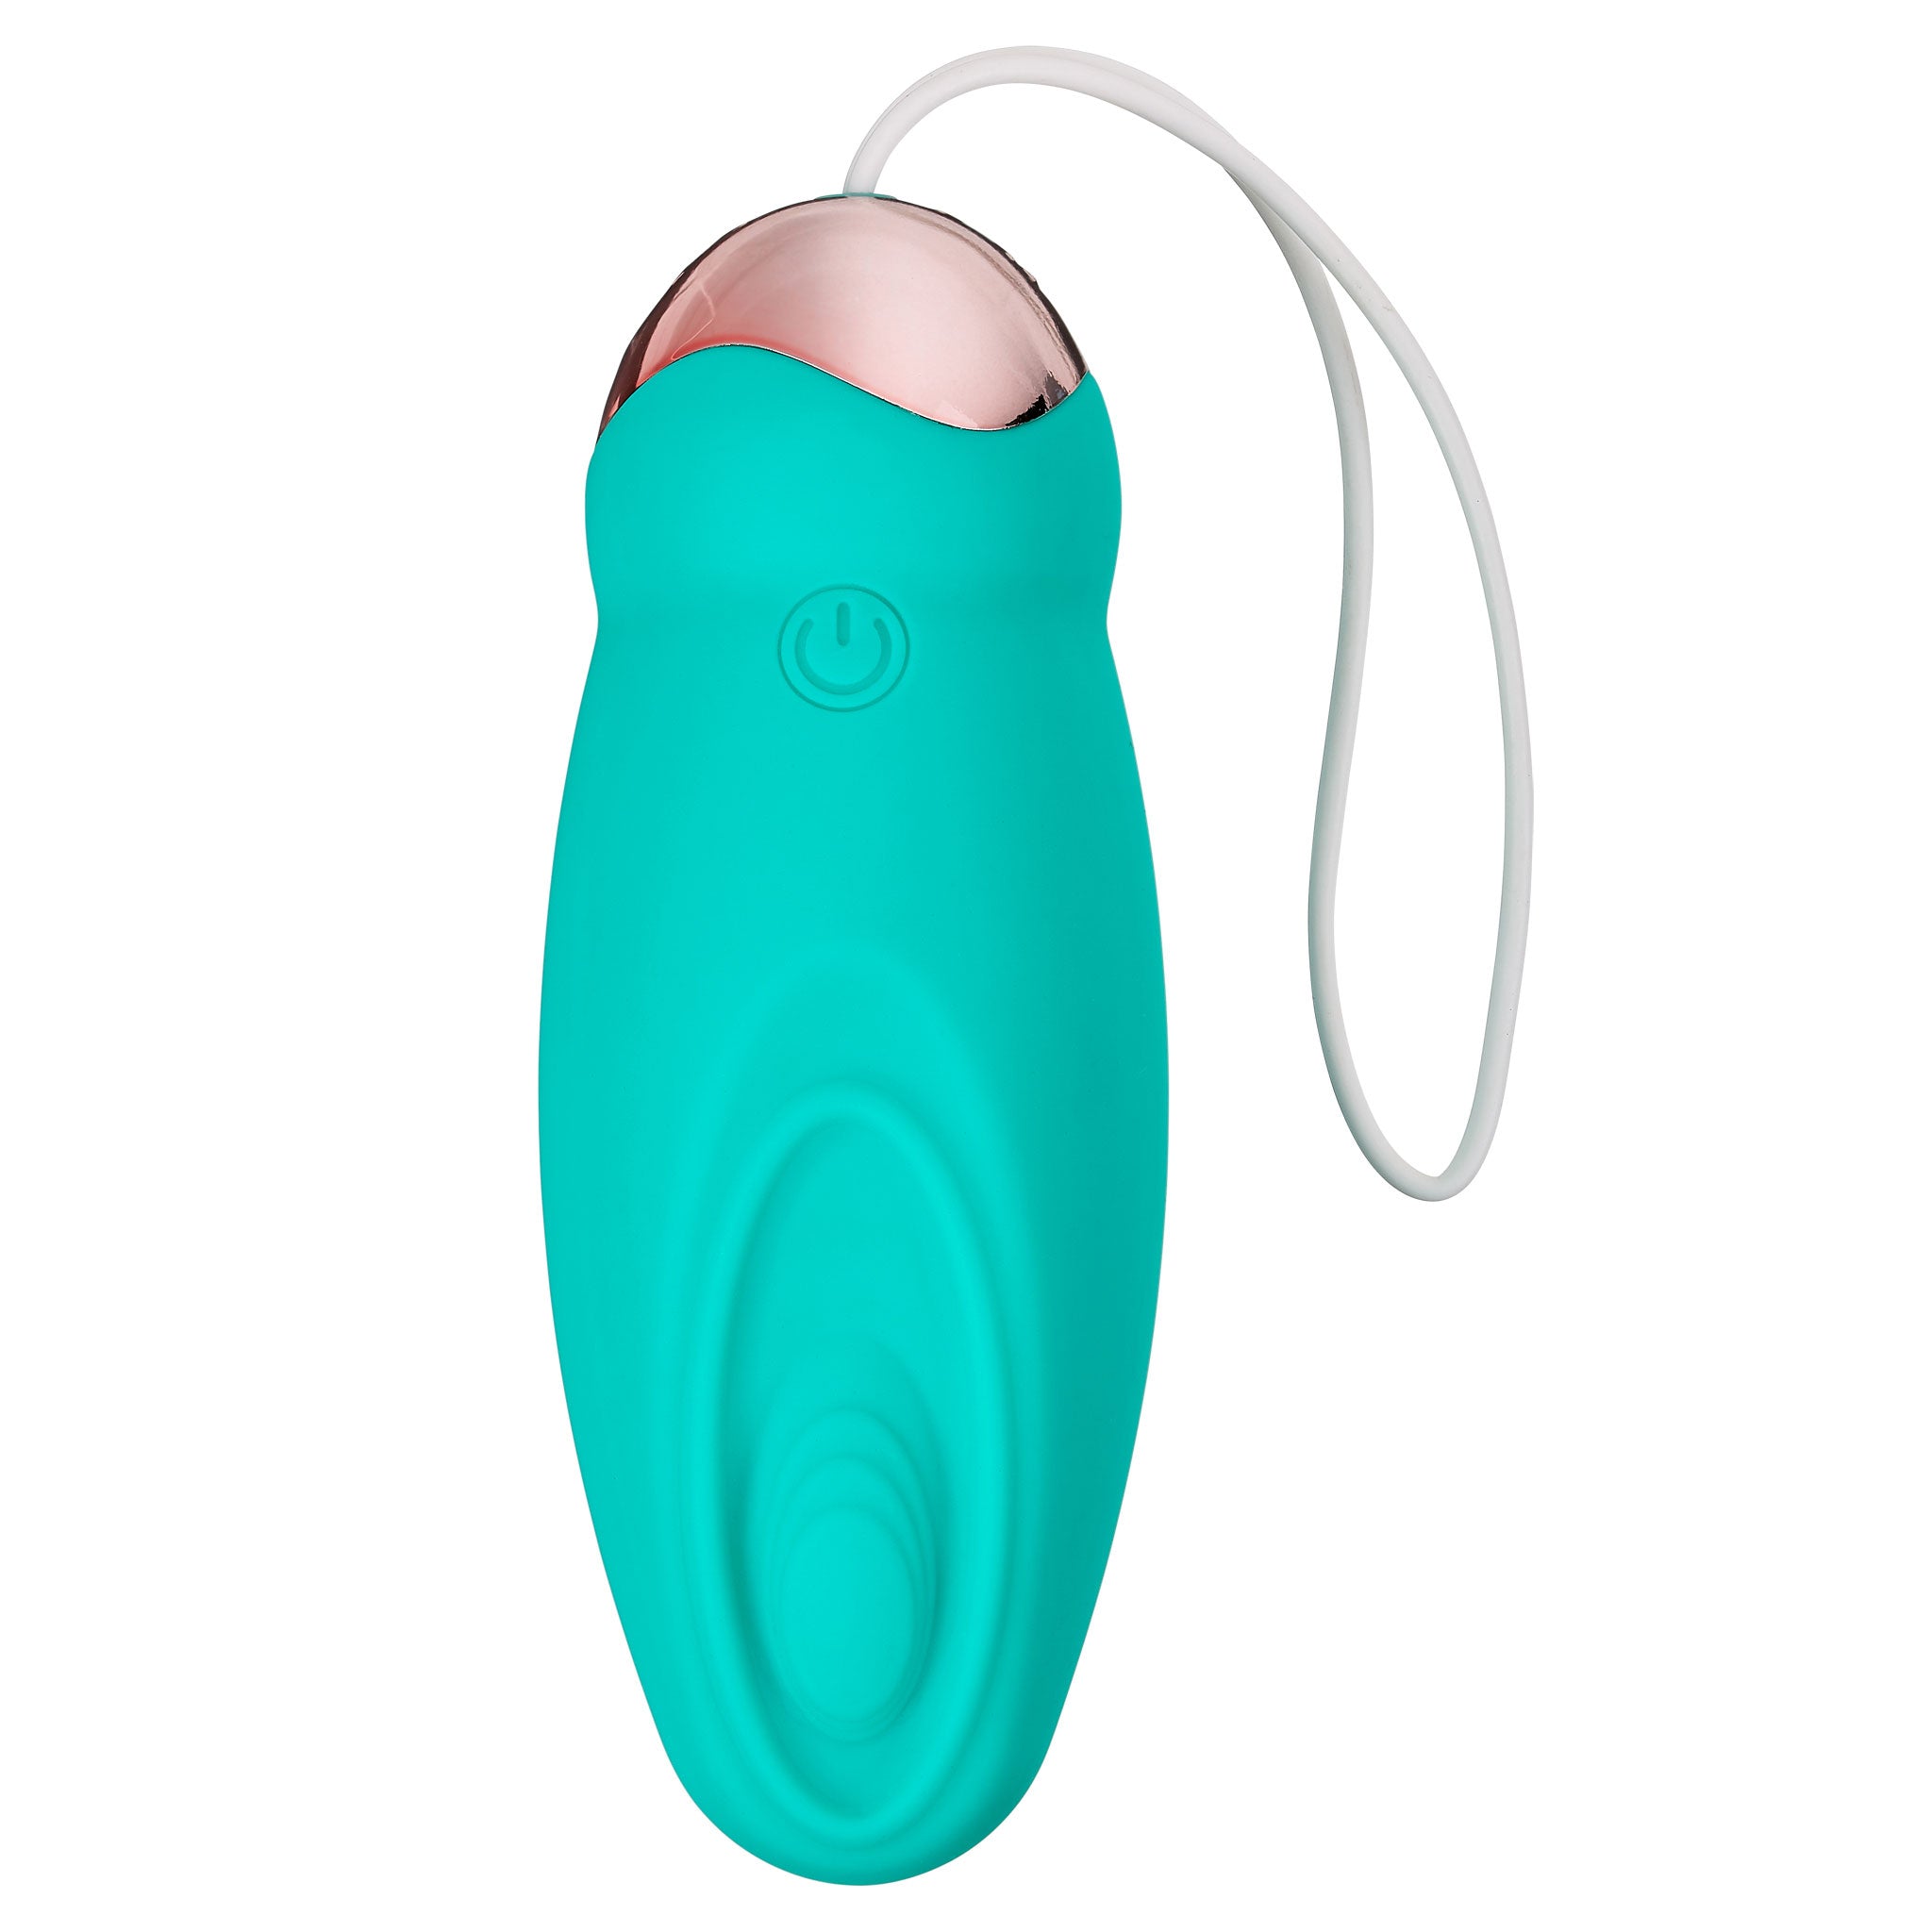 Cloud 9 Health & Wellness Wireless Remote Control Egg W/ Pulsating Motion Teal